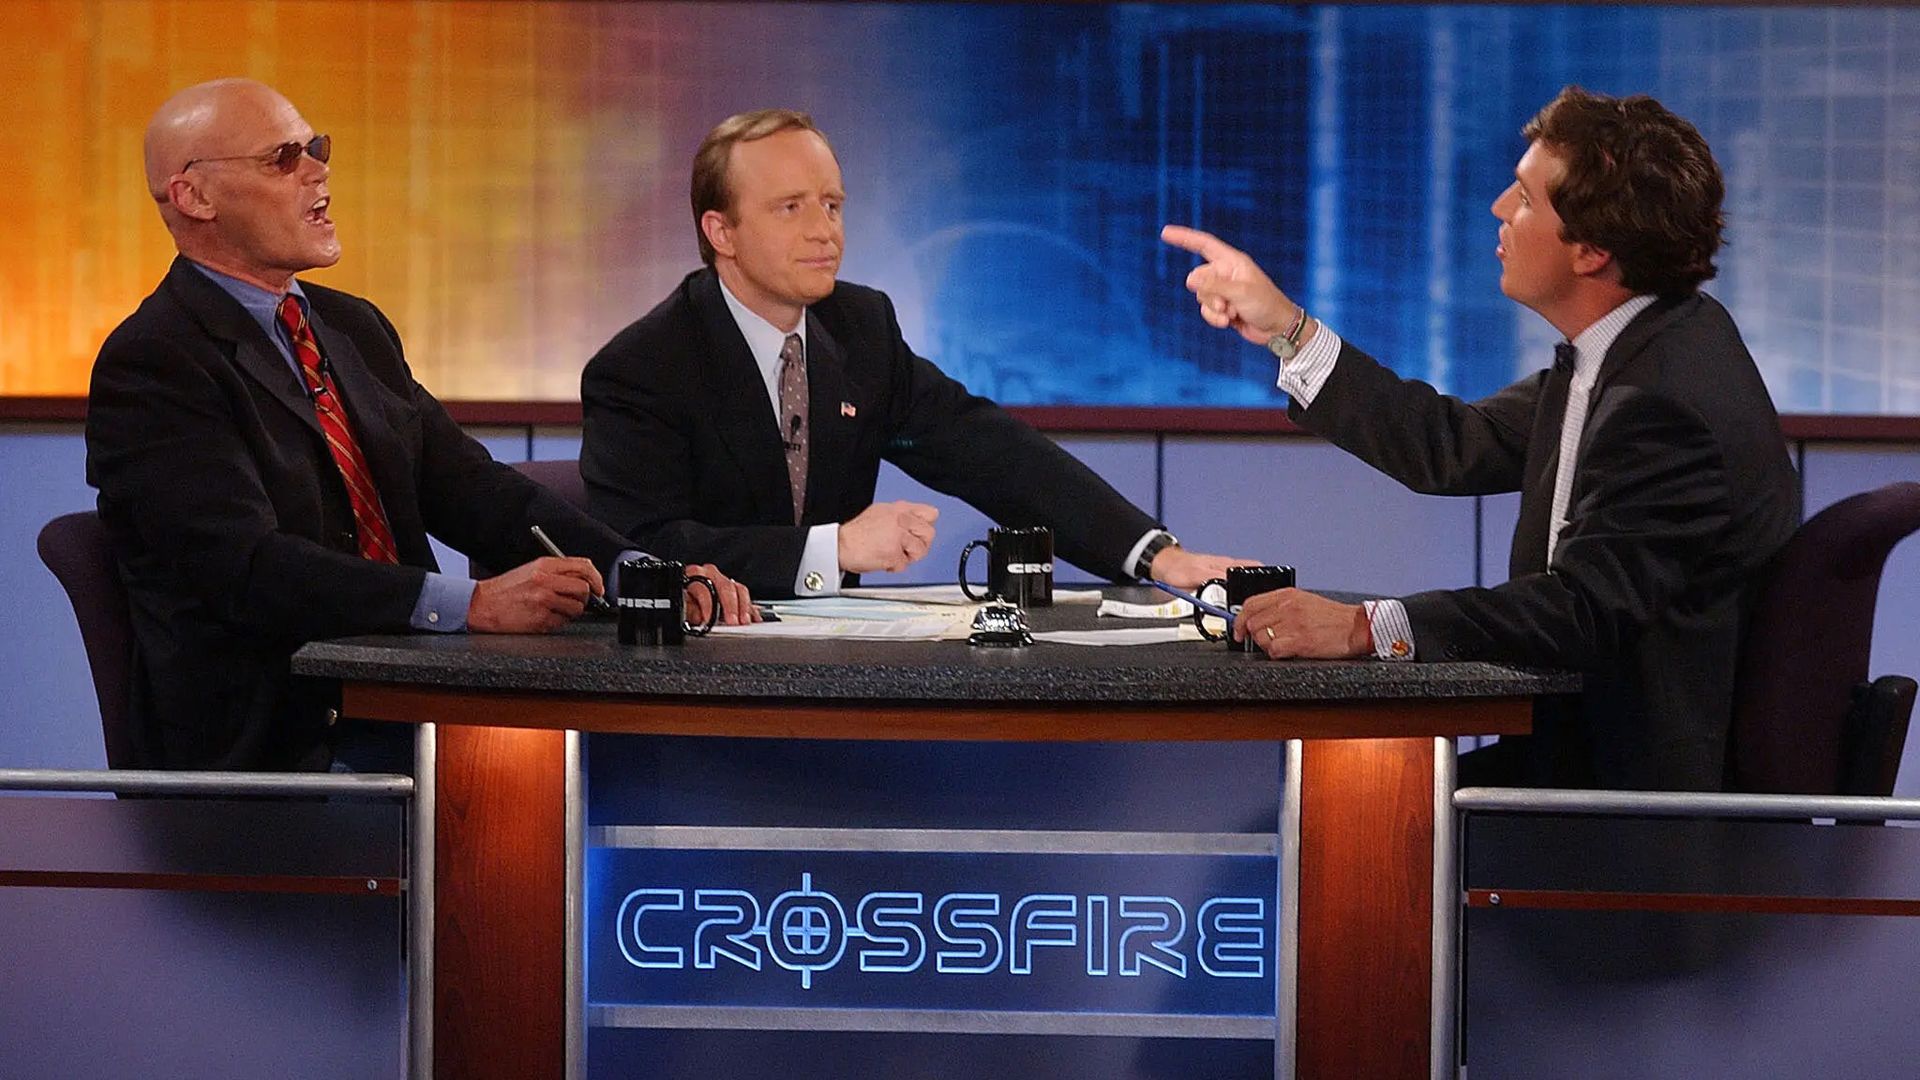 Tucker Carlson on the show 'Crossfire'